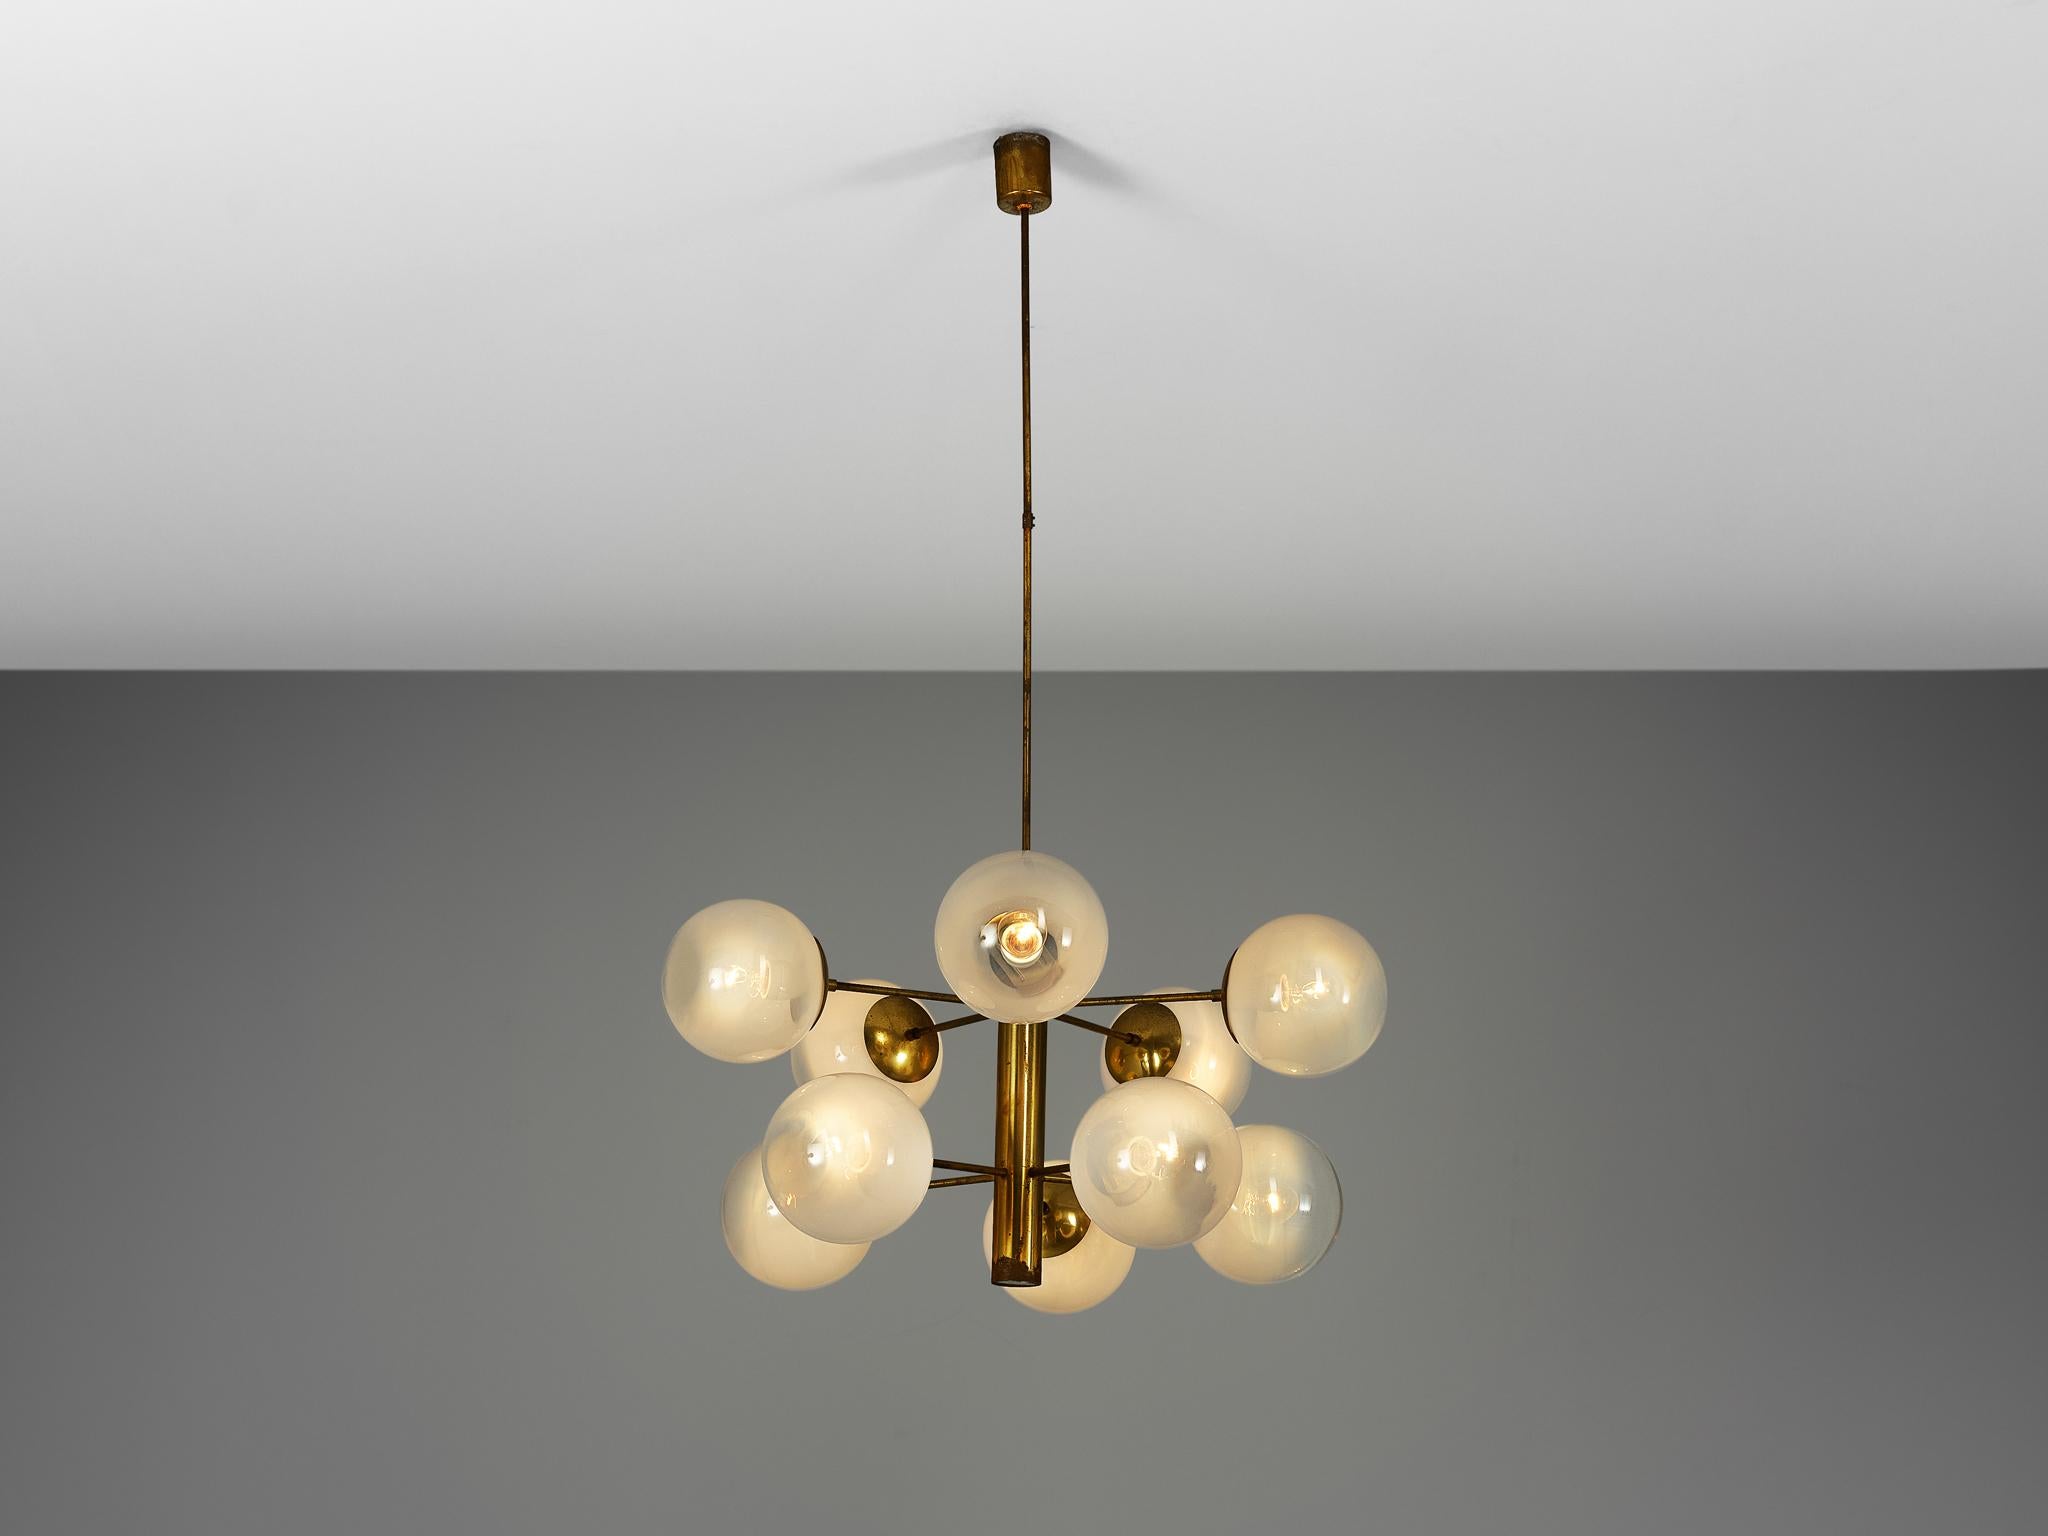 Sputnik chandelier, brass, glass, Europe, 1970s. 

This double layered Sputnik has ten wonderful glass globes. The chandeliers consist of a brass fixture with ten arms, all with a glass sphere. The brass shows an all-over patina. Due the